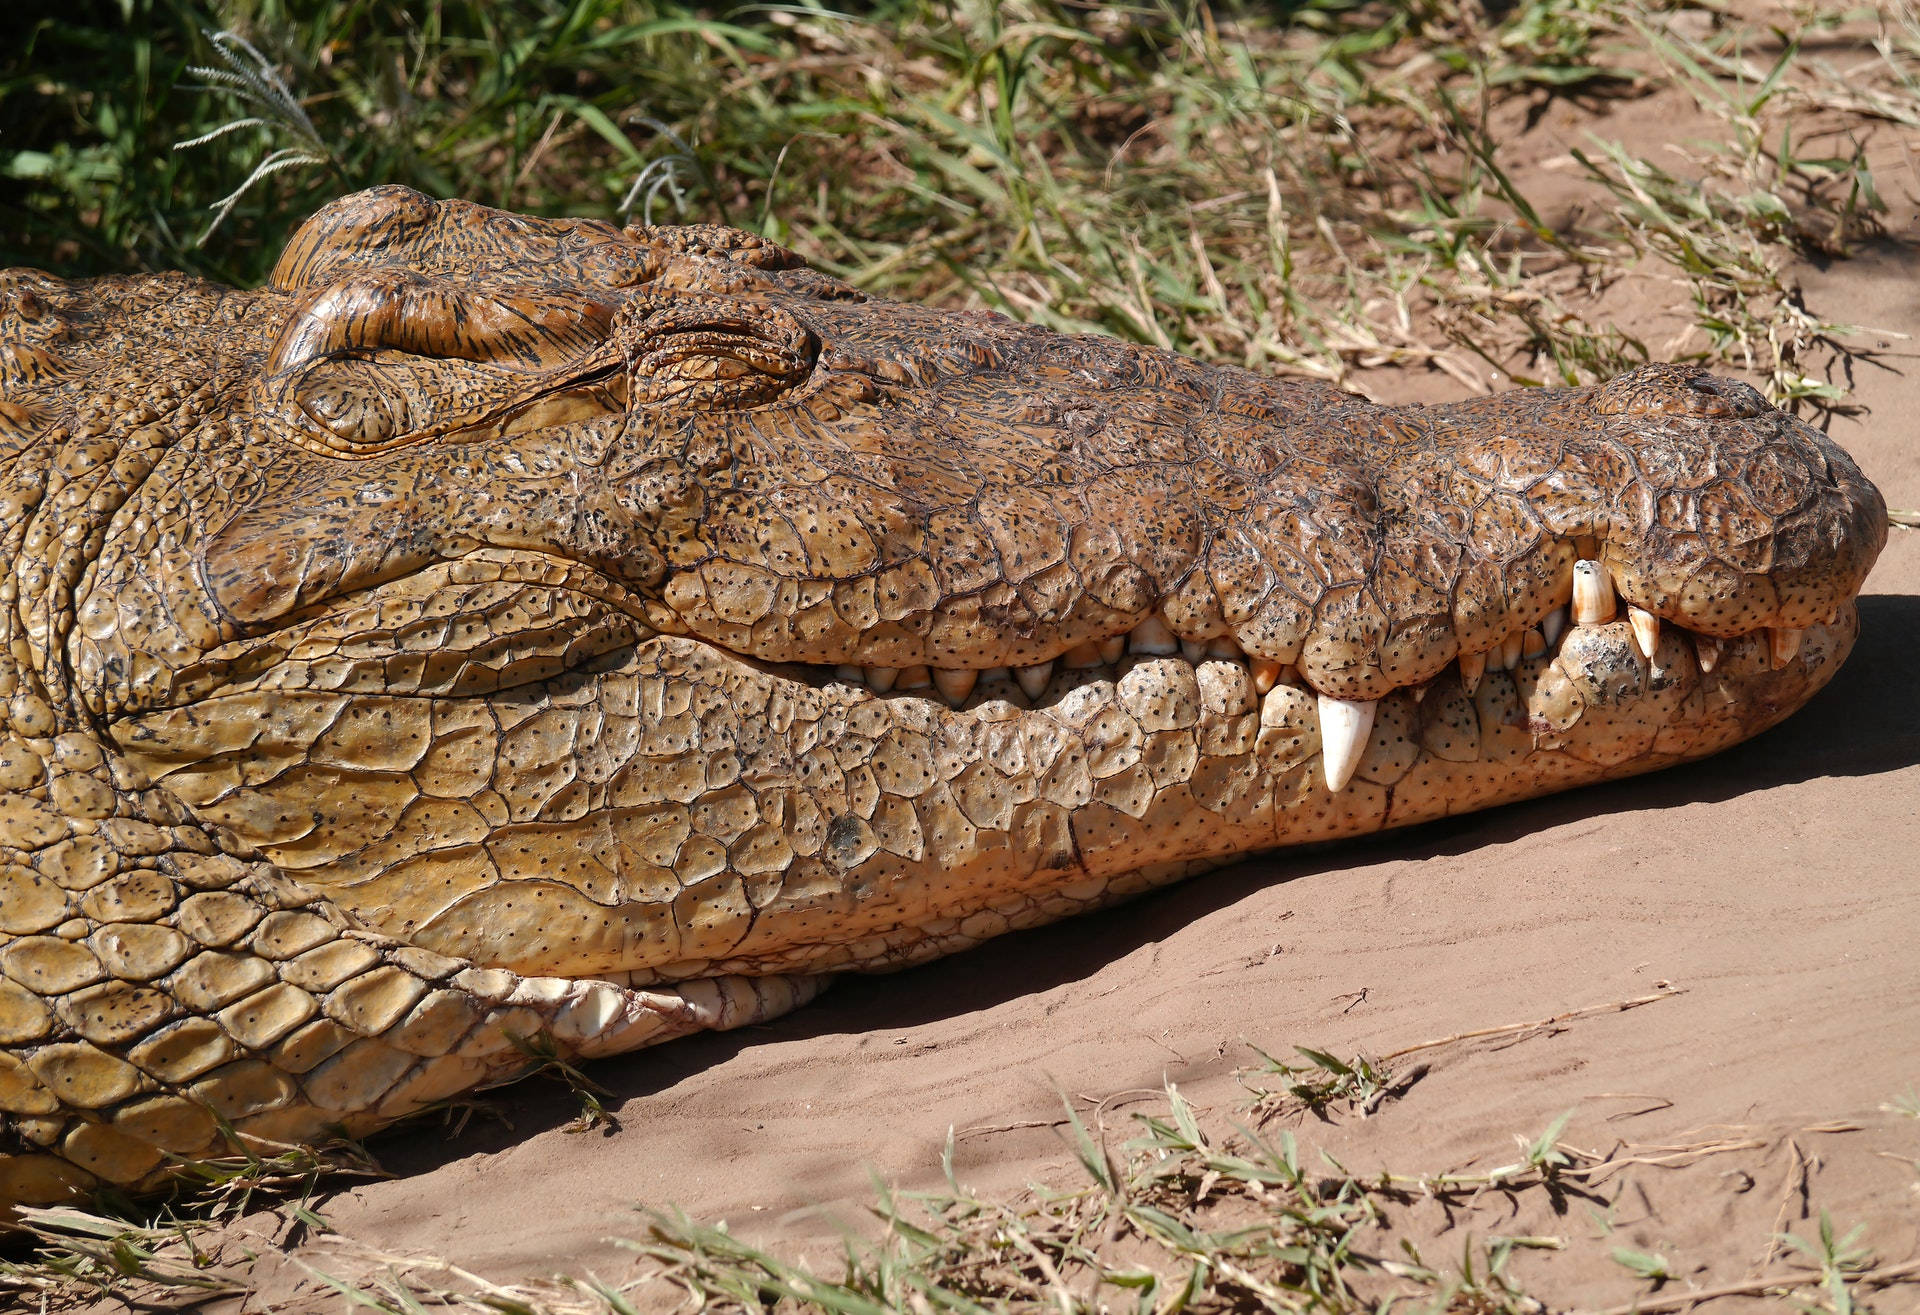 Mesmerizing Close-Up of a Smiling Brown Alligator Wallpaper